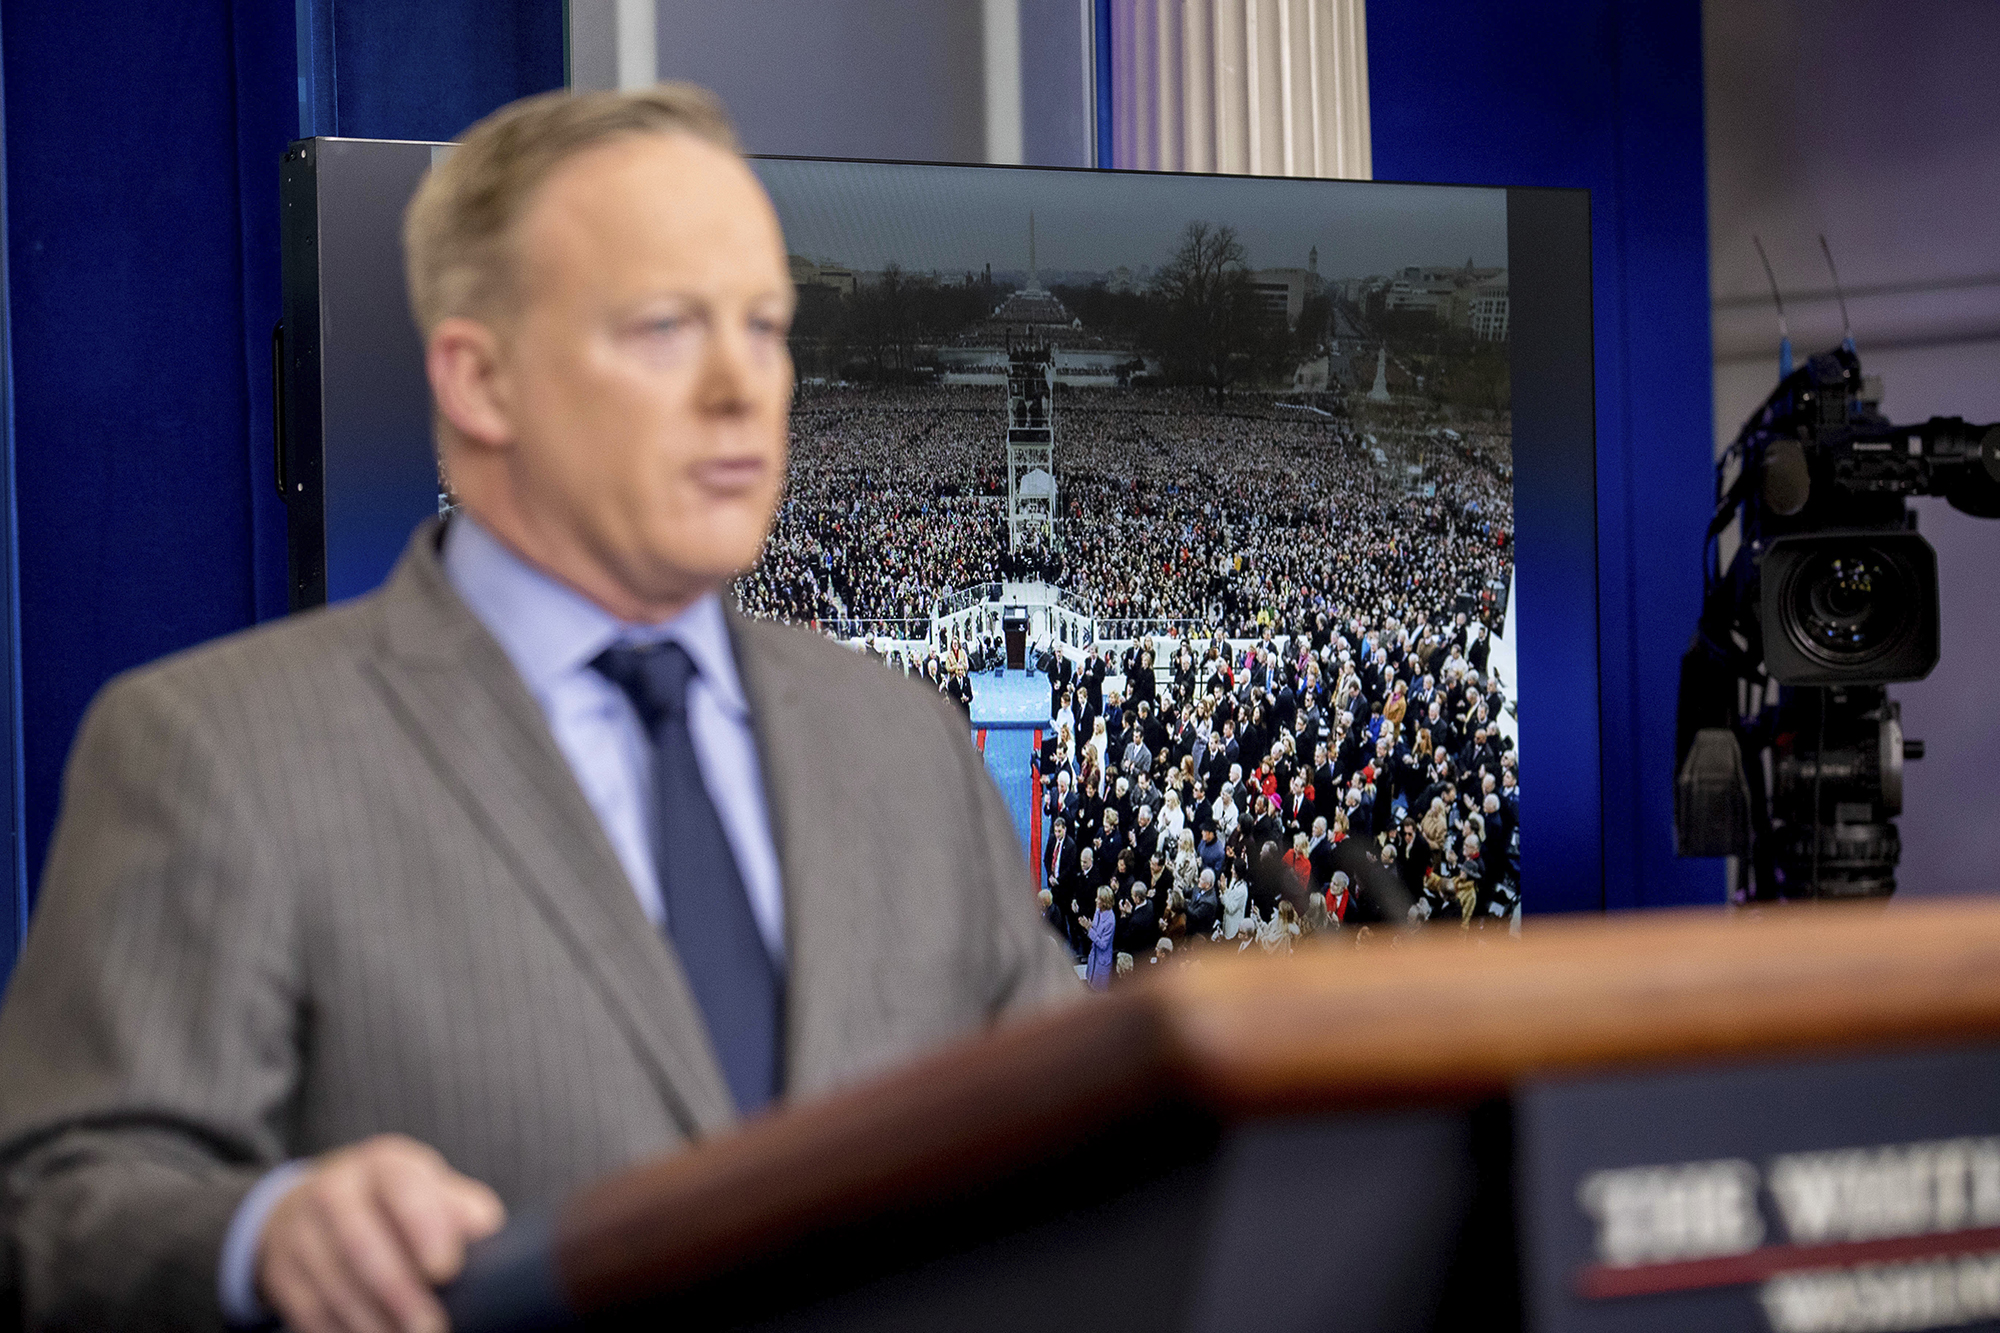 An image of the inauguration of President Donald Trump is displayed behind White House press secretary Sean Spicer as he speaks at the White House, Saturday, Jan. 21, 2017, in Washington. (AP Photo/Andrew Harnik)